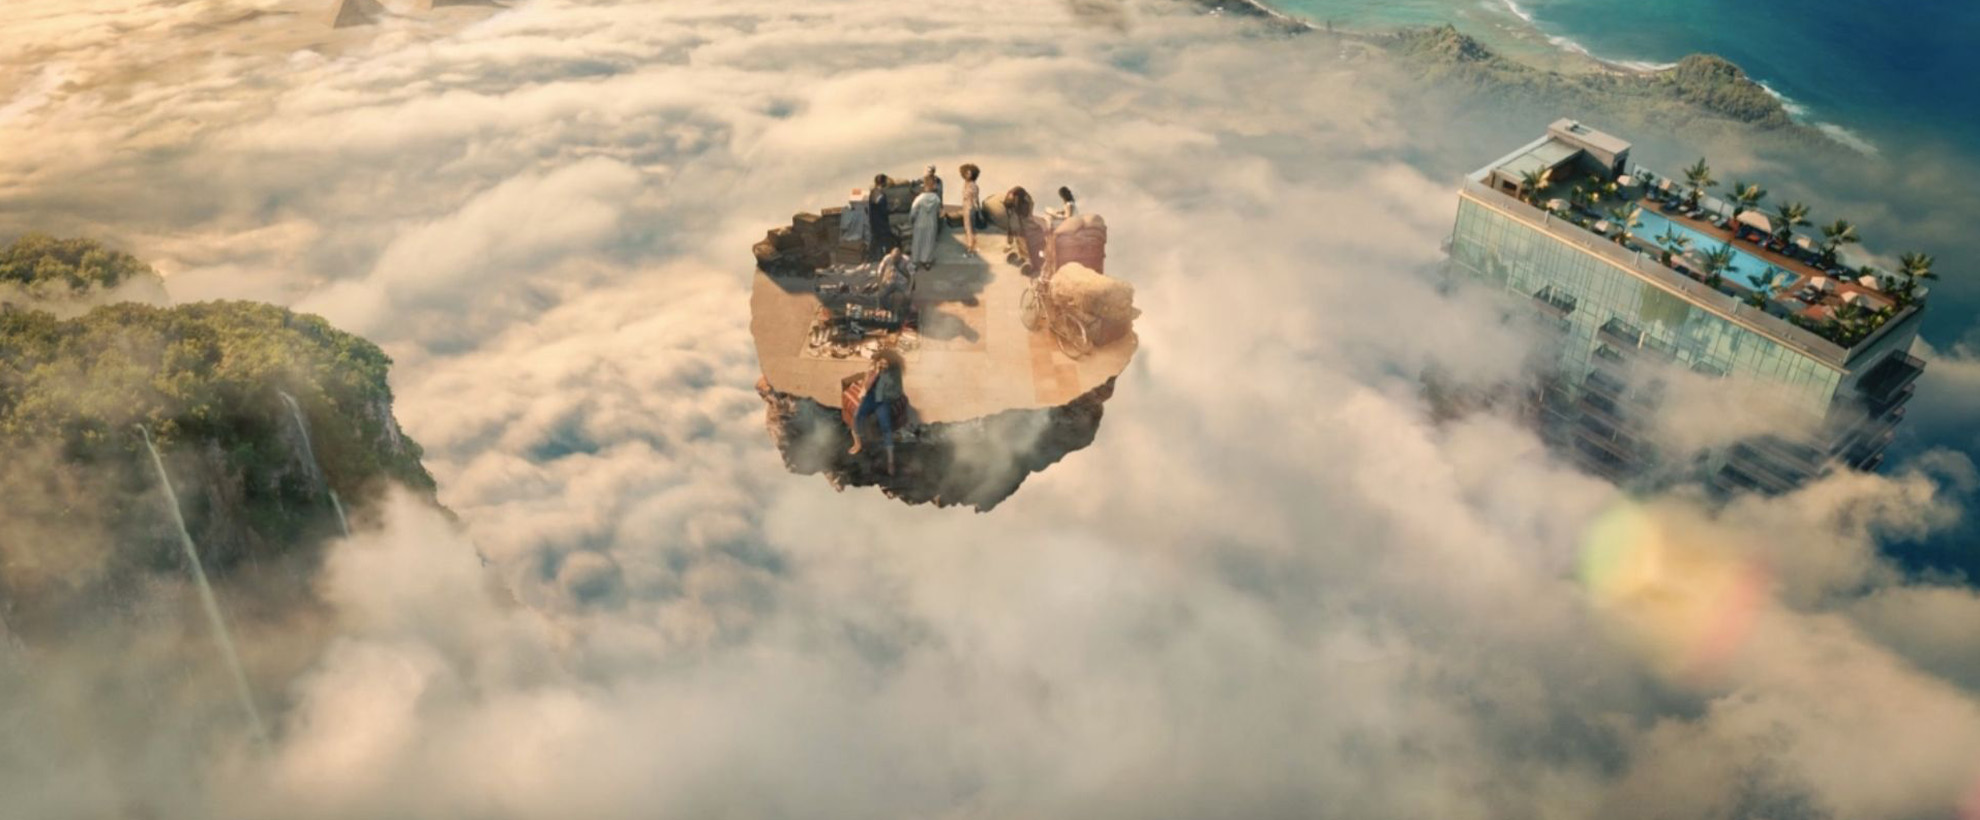 A floating island with people on it surrounded by clouds. On the left there is the roof of a holiday resort.